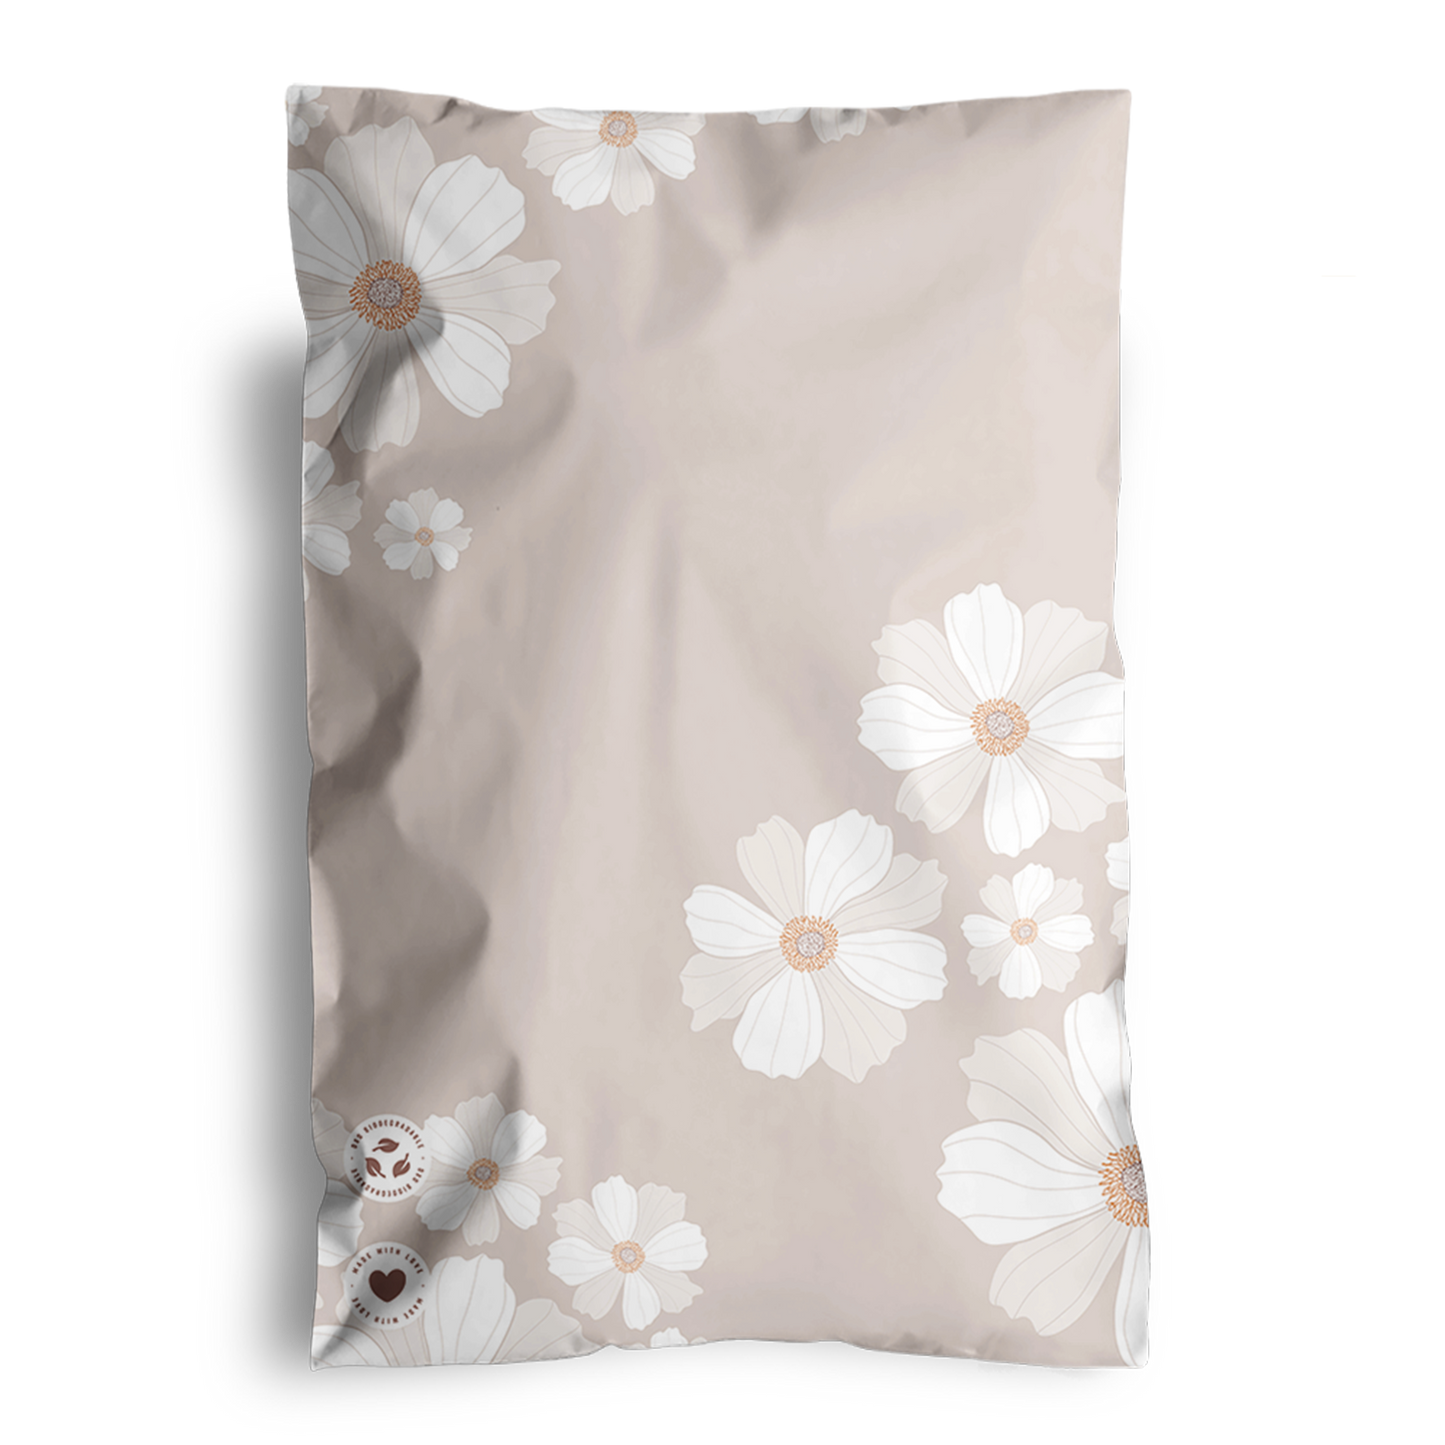 Floral patterned blanket or throw with a white and beige color scheme, packaged in impack.co Cosmos Biodegradable Mailers 6" x 9".